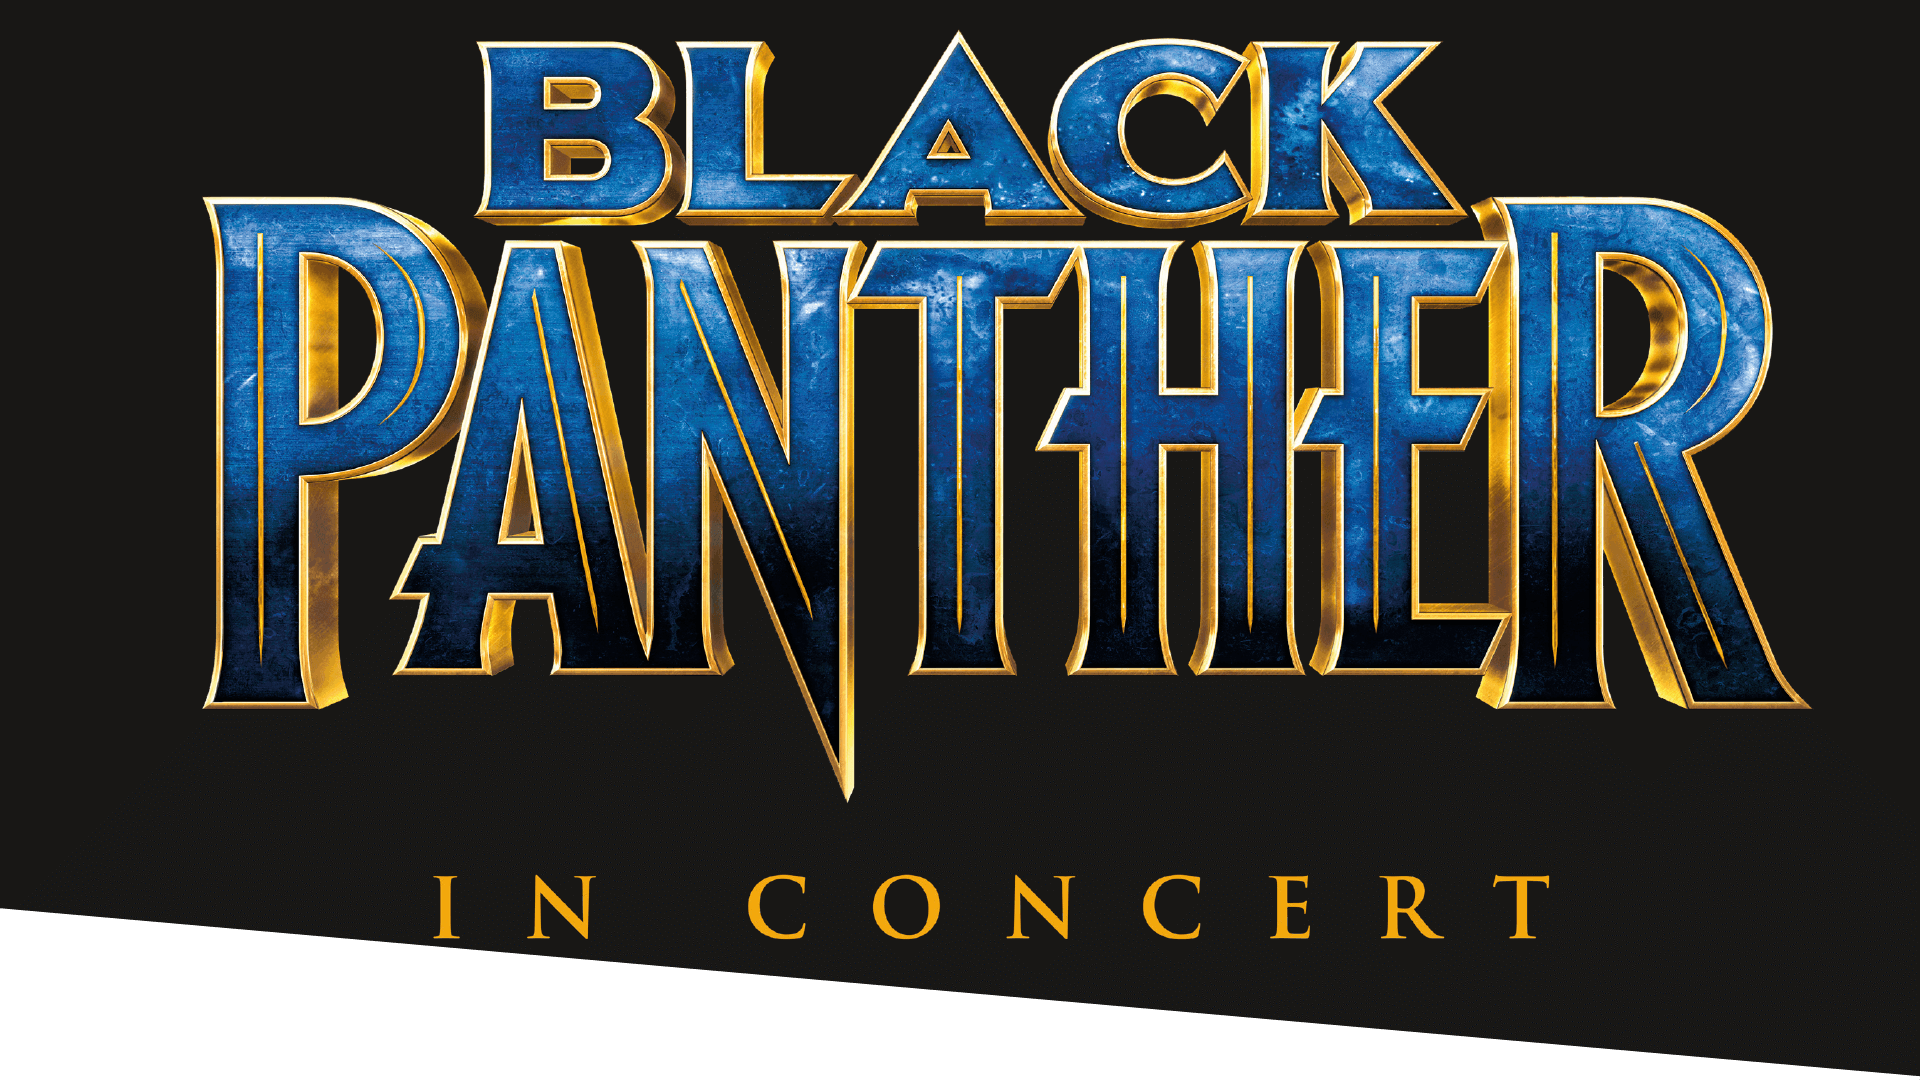 Black Panther in concert